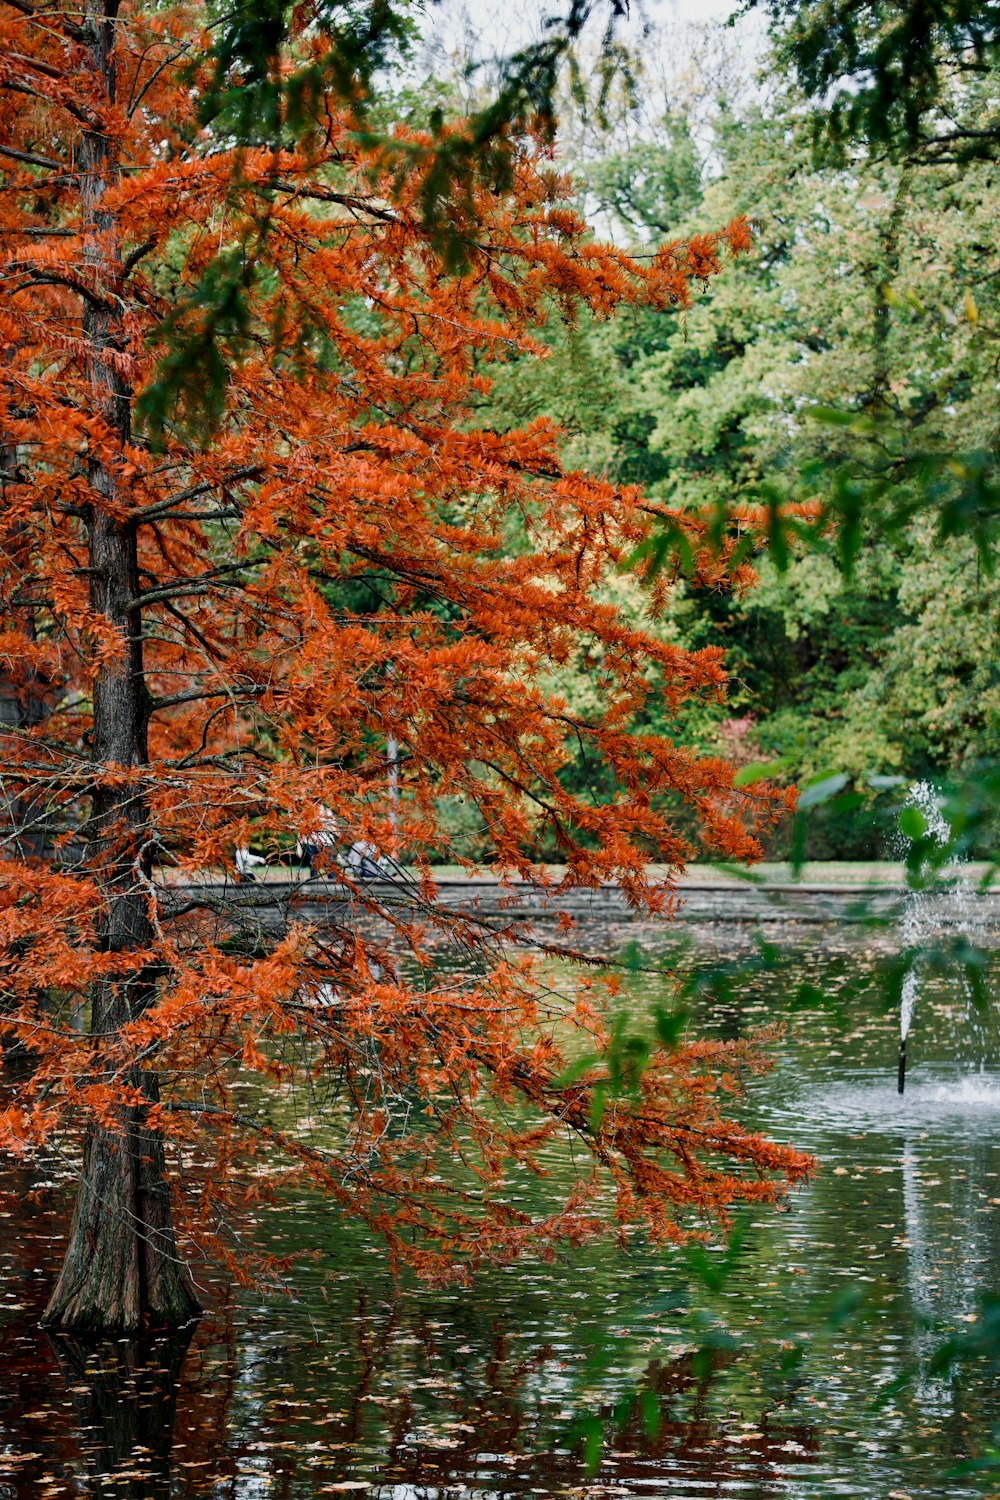 a pond surrounded by trees with orange leaves